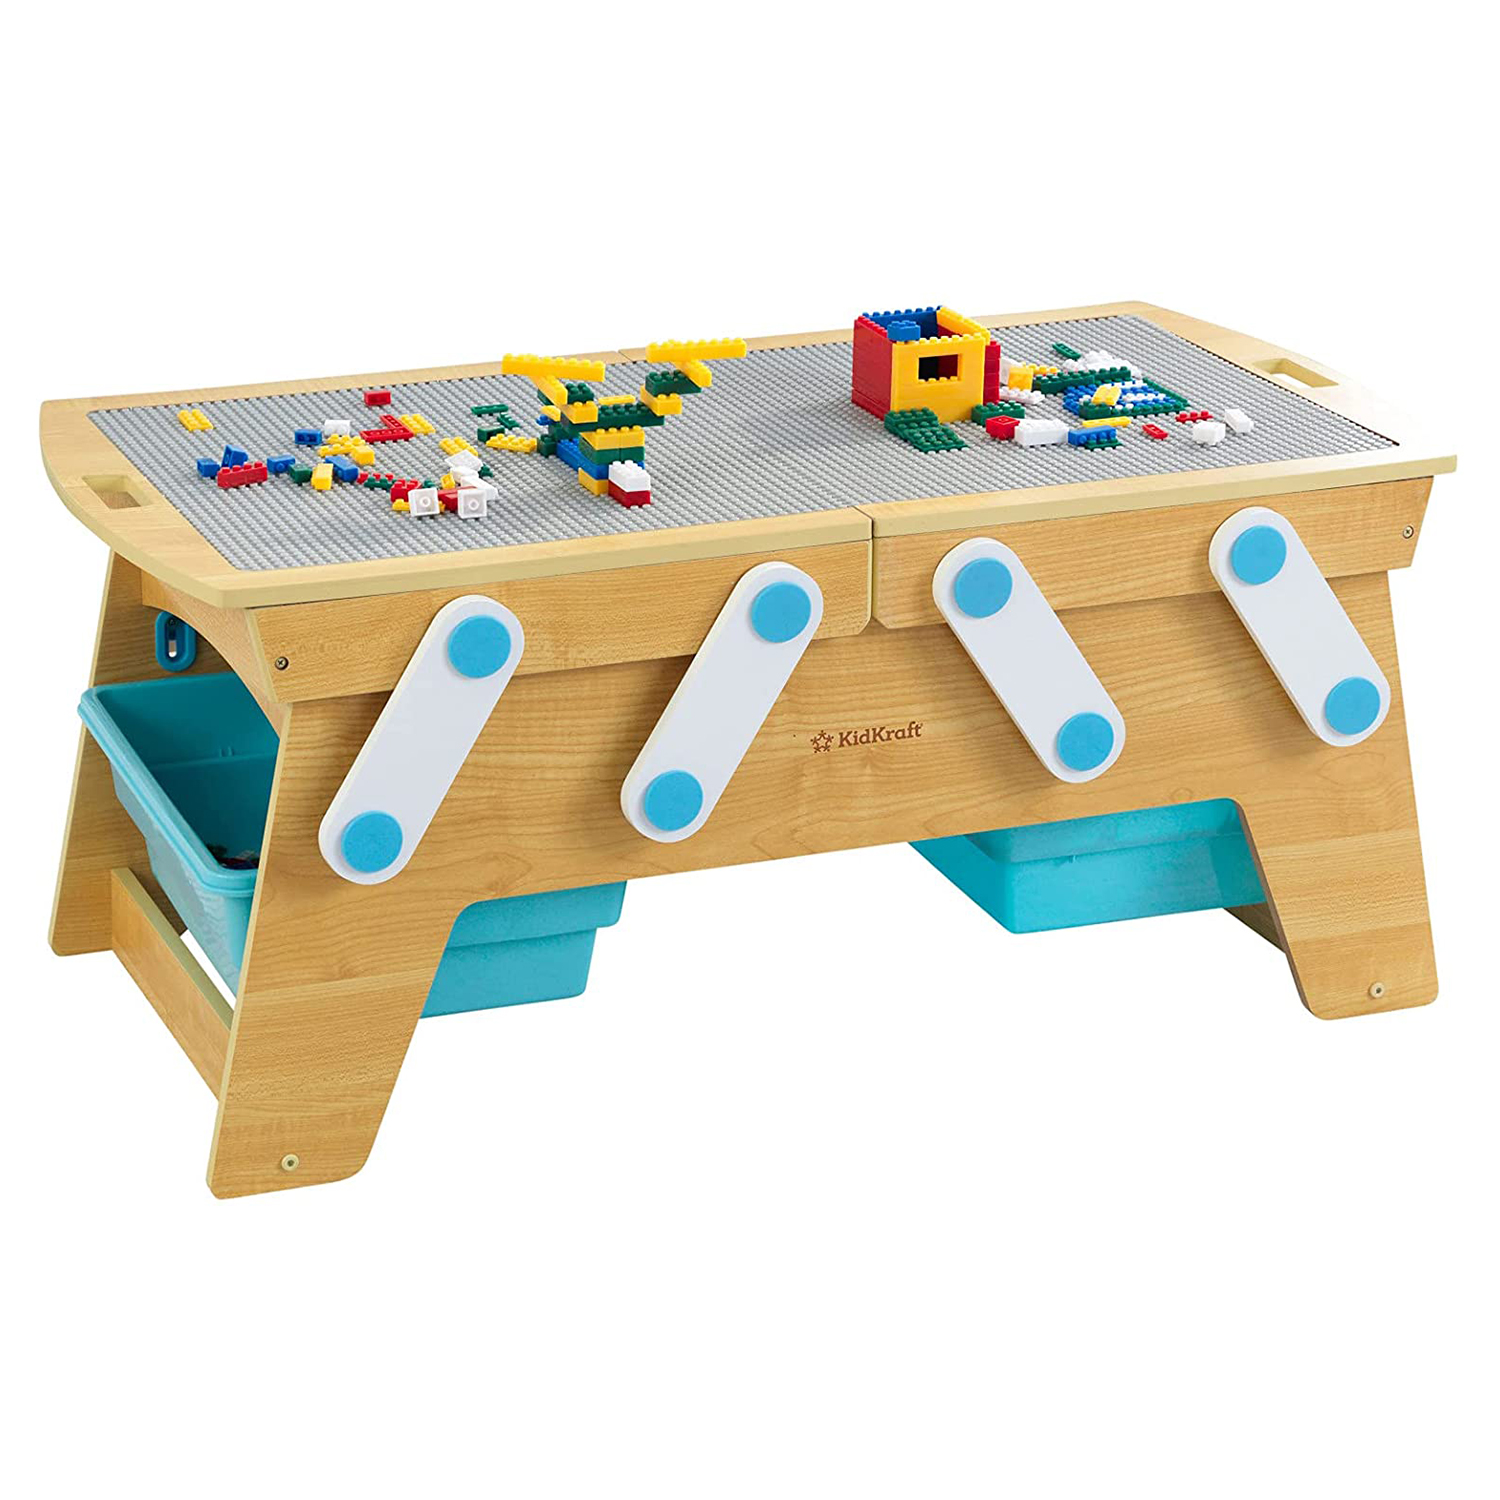 Best Lego Table With Storage for Sibling Play: KidKraft Building Bricks Play and Store Table 